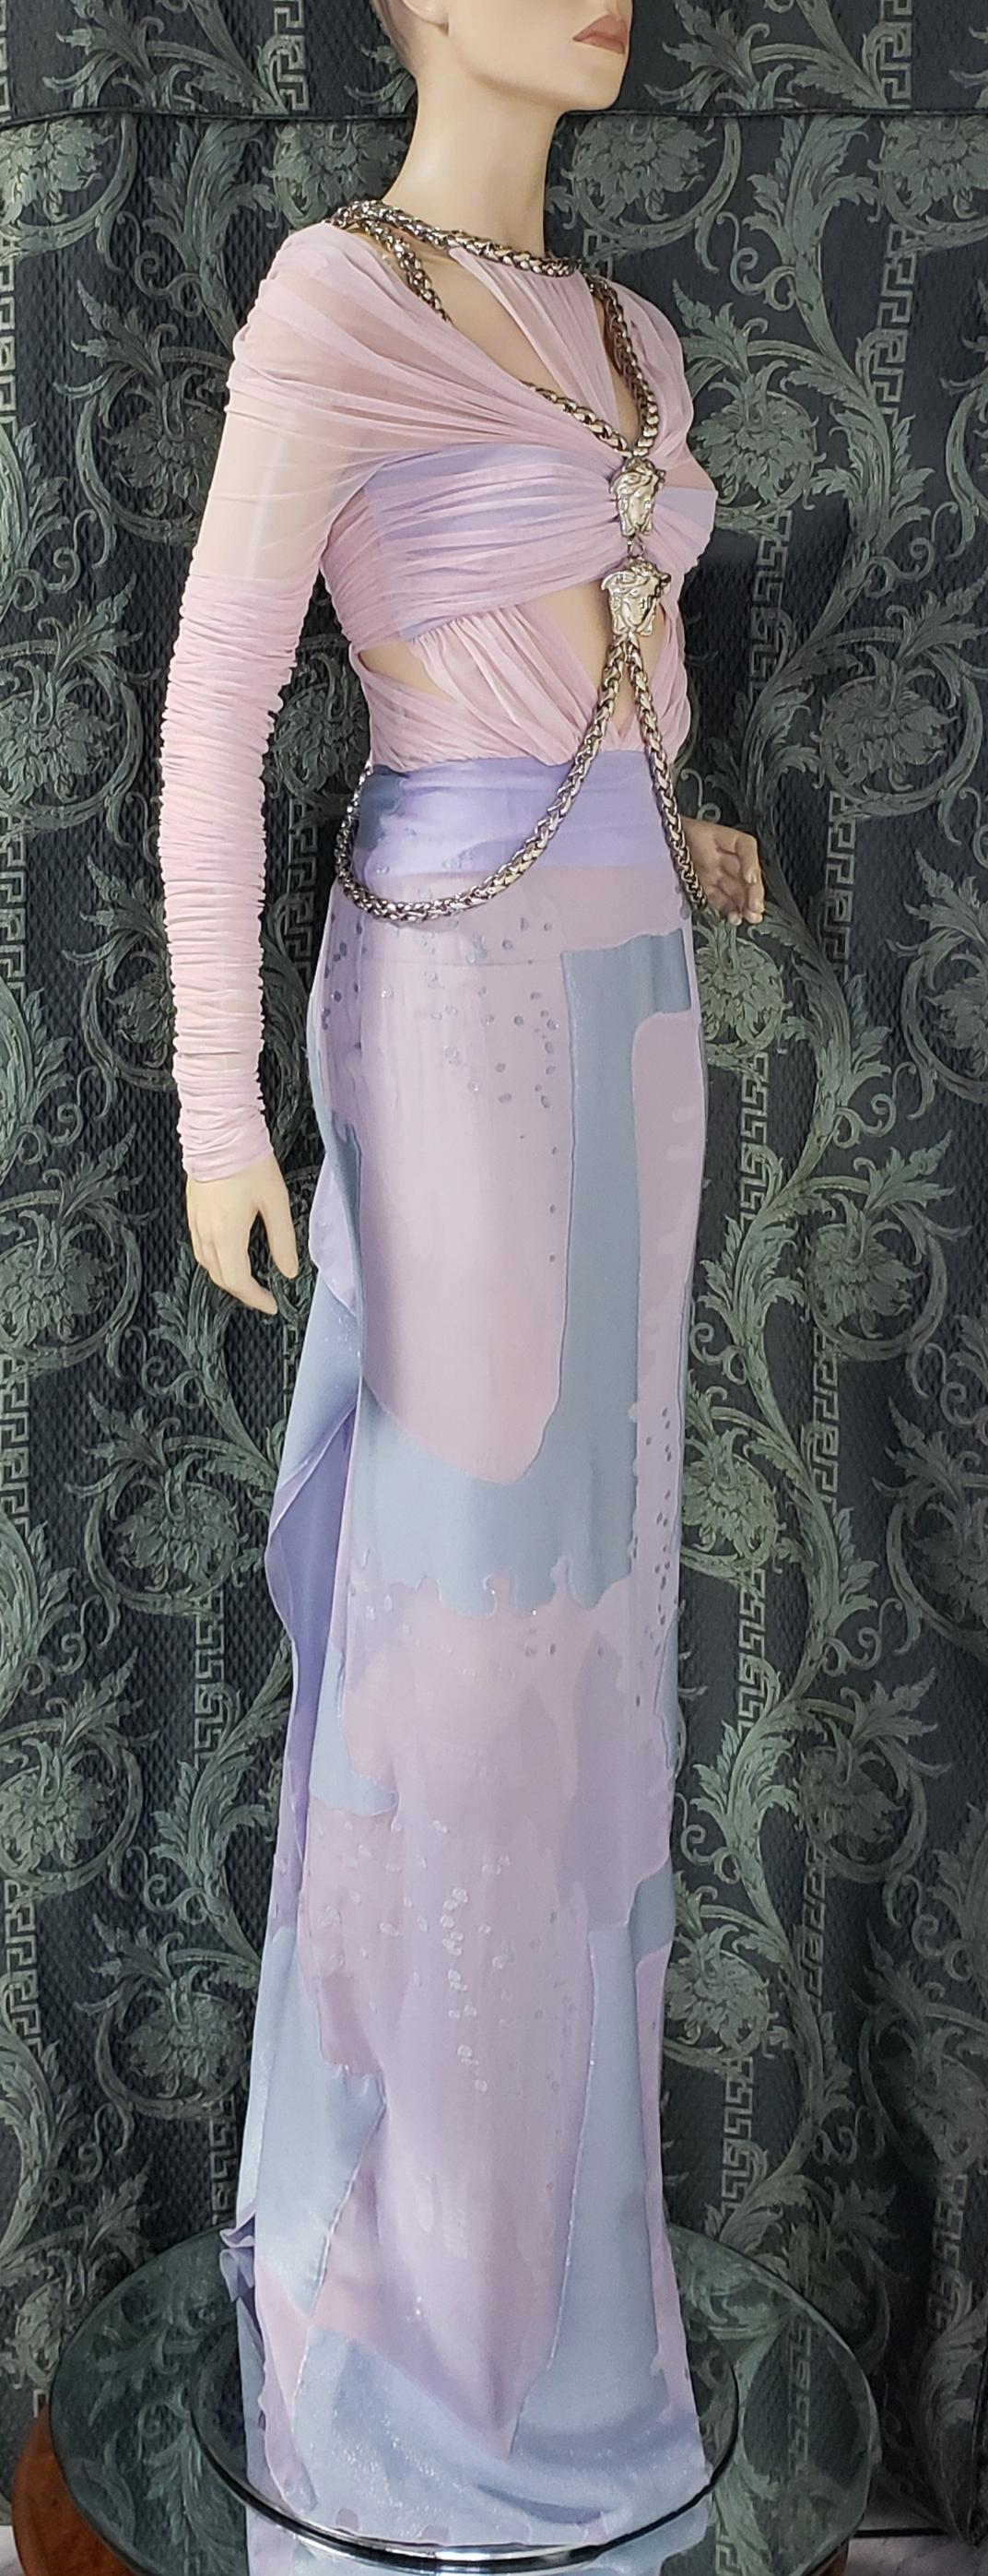 S/S 2014 look # 44 NEW VERSACE CHIFFON LILAC LONG DRESS GOWN  1